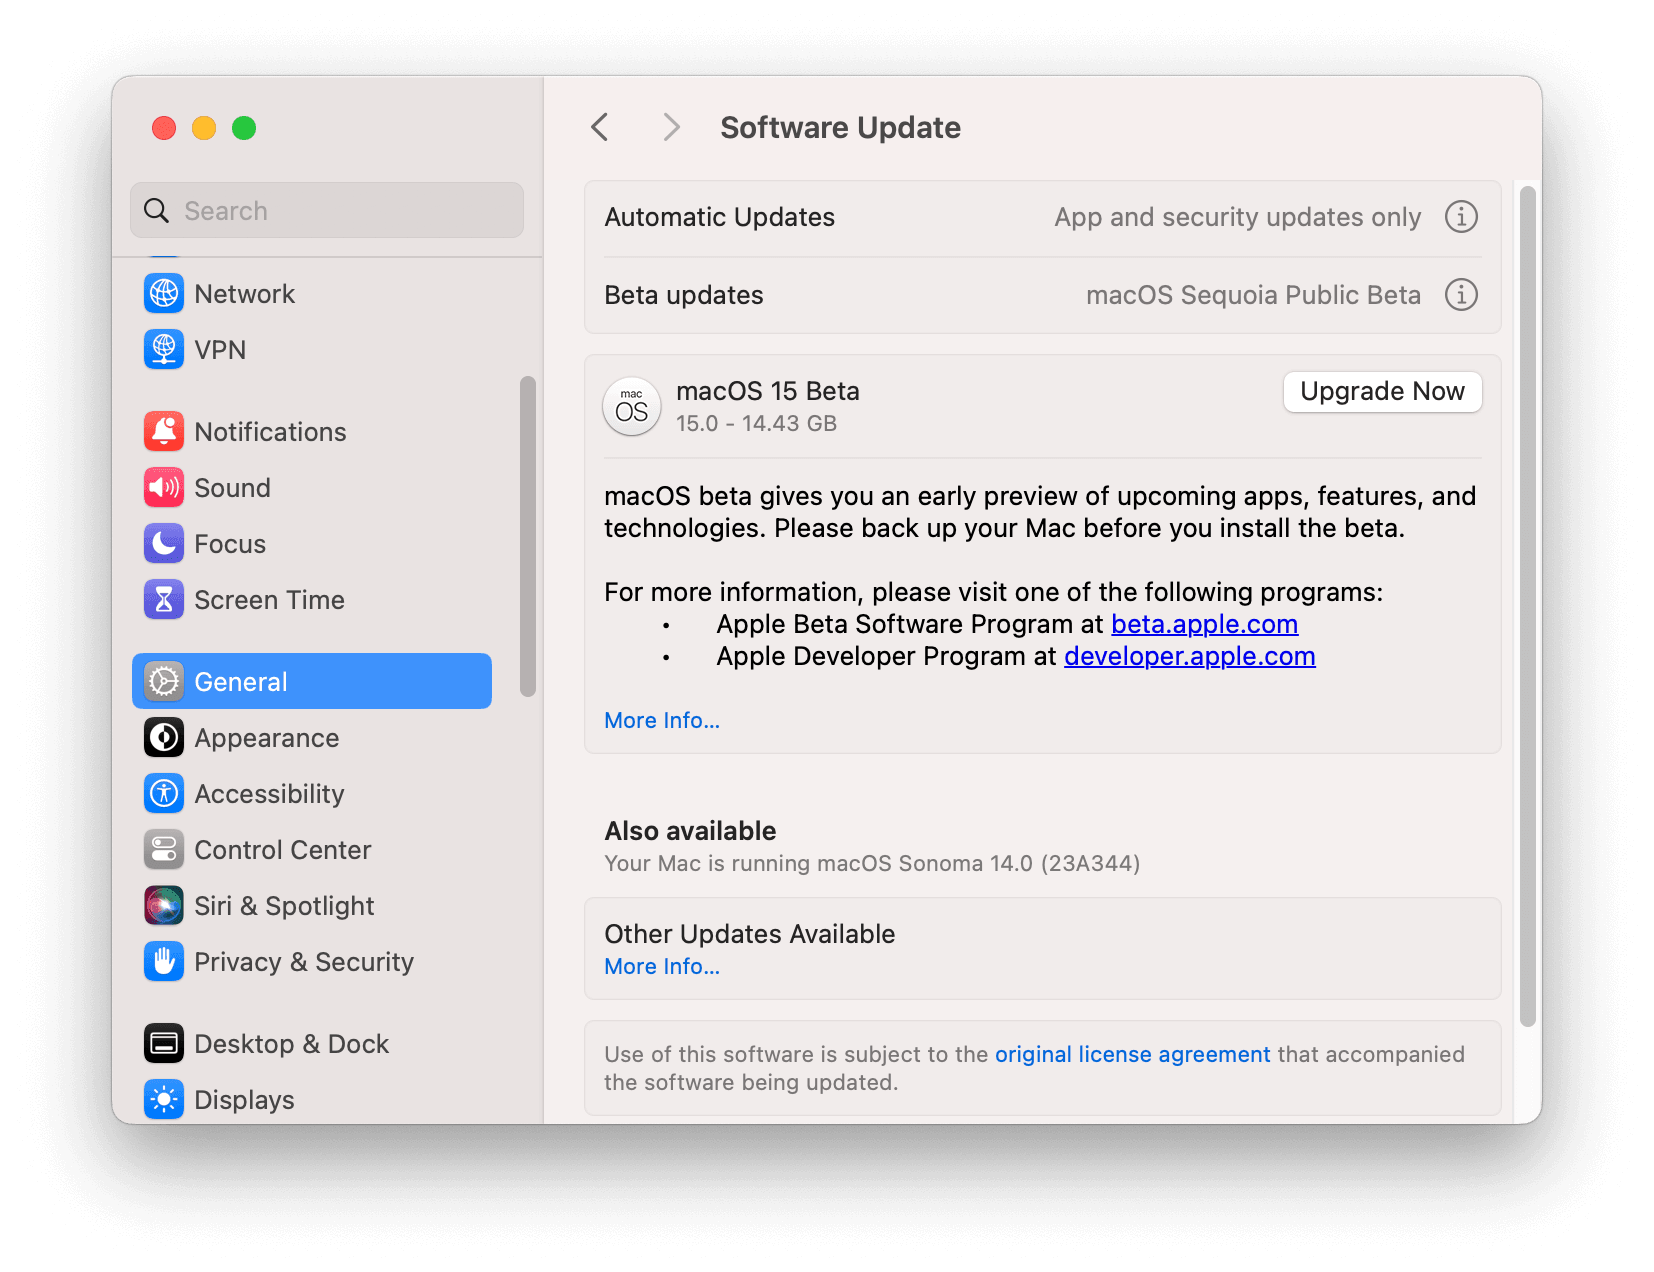 Download and Install macOS Sequoia Public Beta